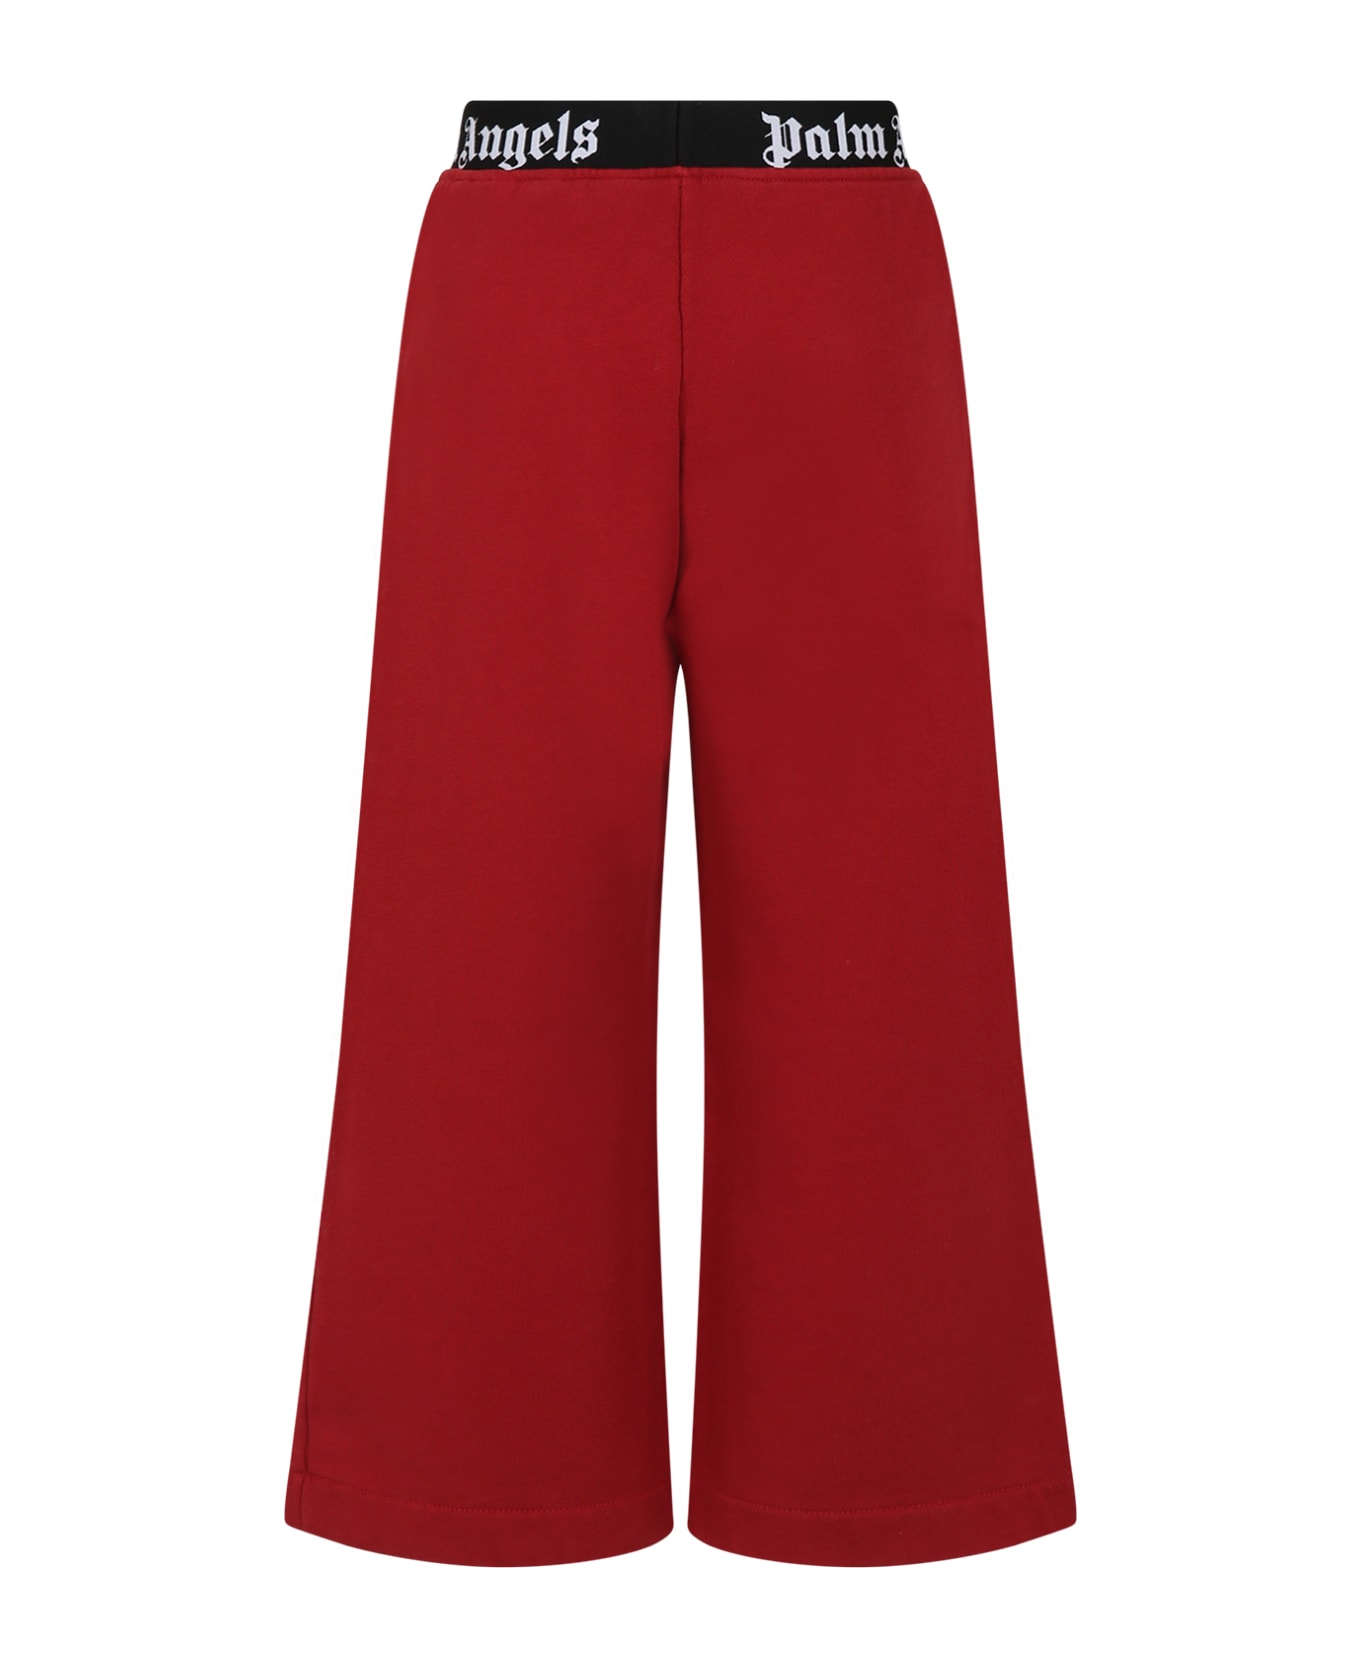 Palm Angels Burgundy Trousers For Girl With Logo - Bordeaux